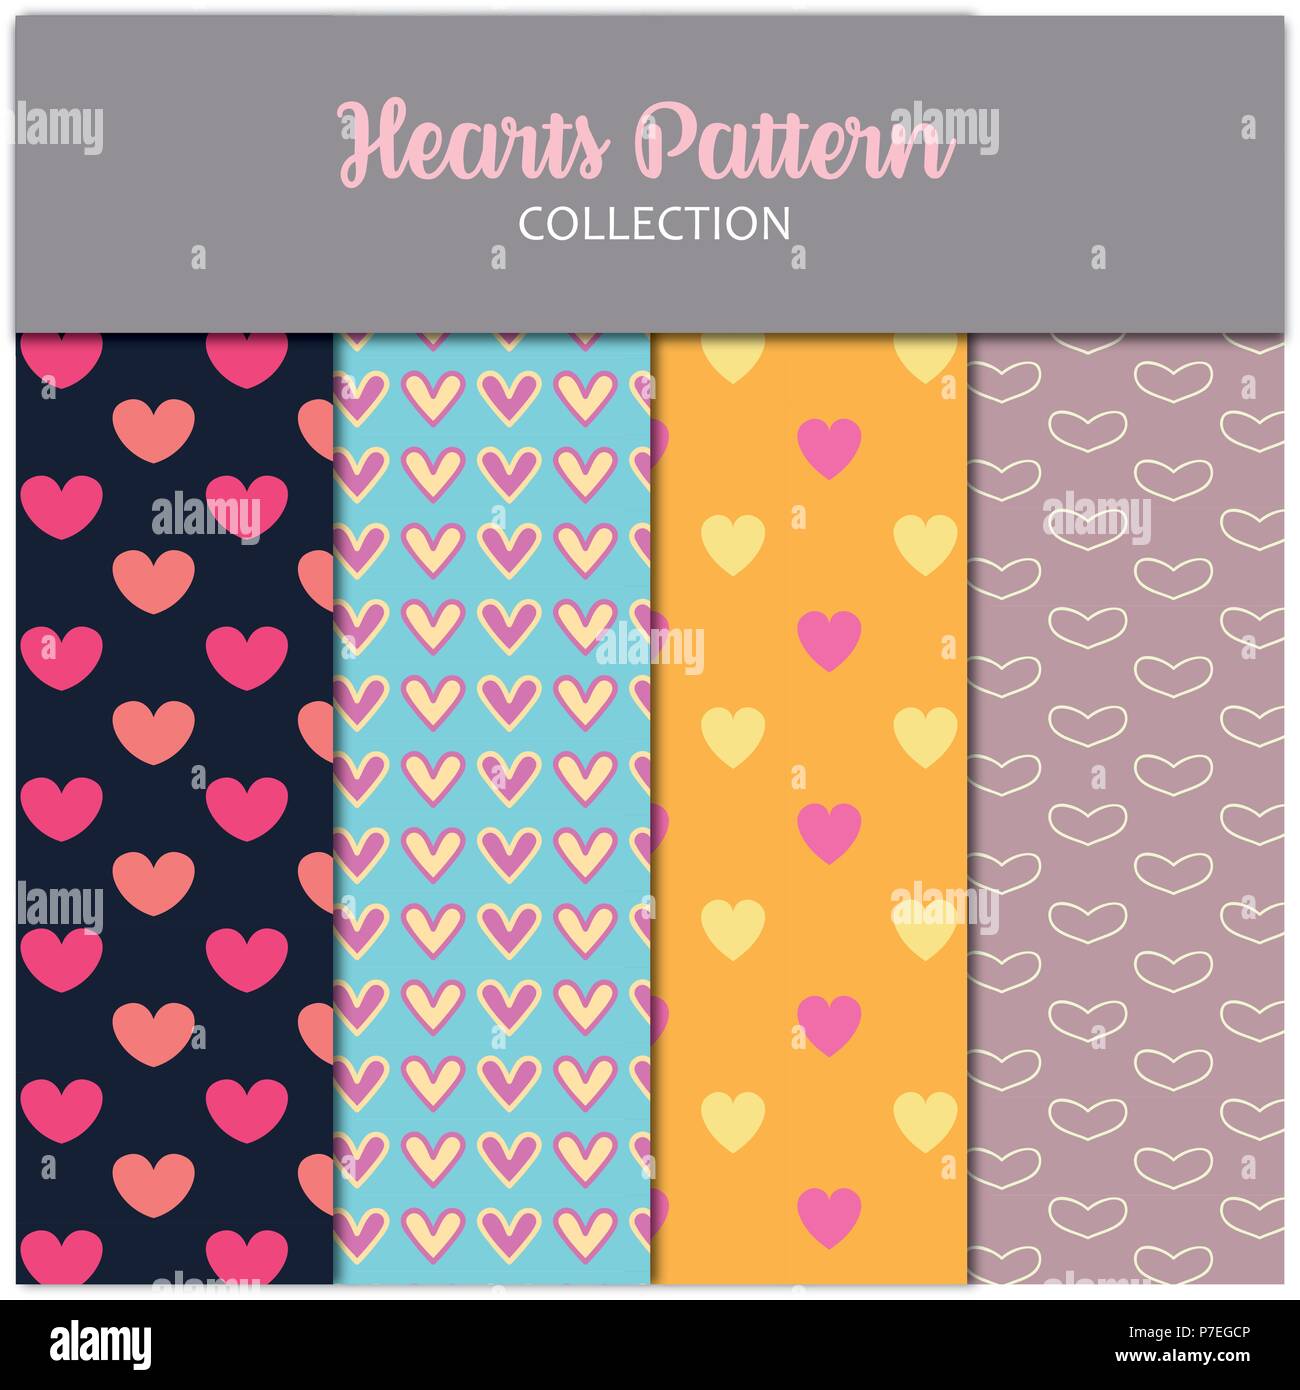 Hearts pattern collection Stock Vector